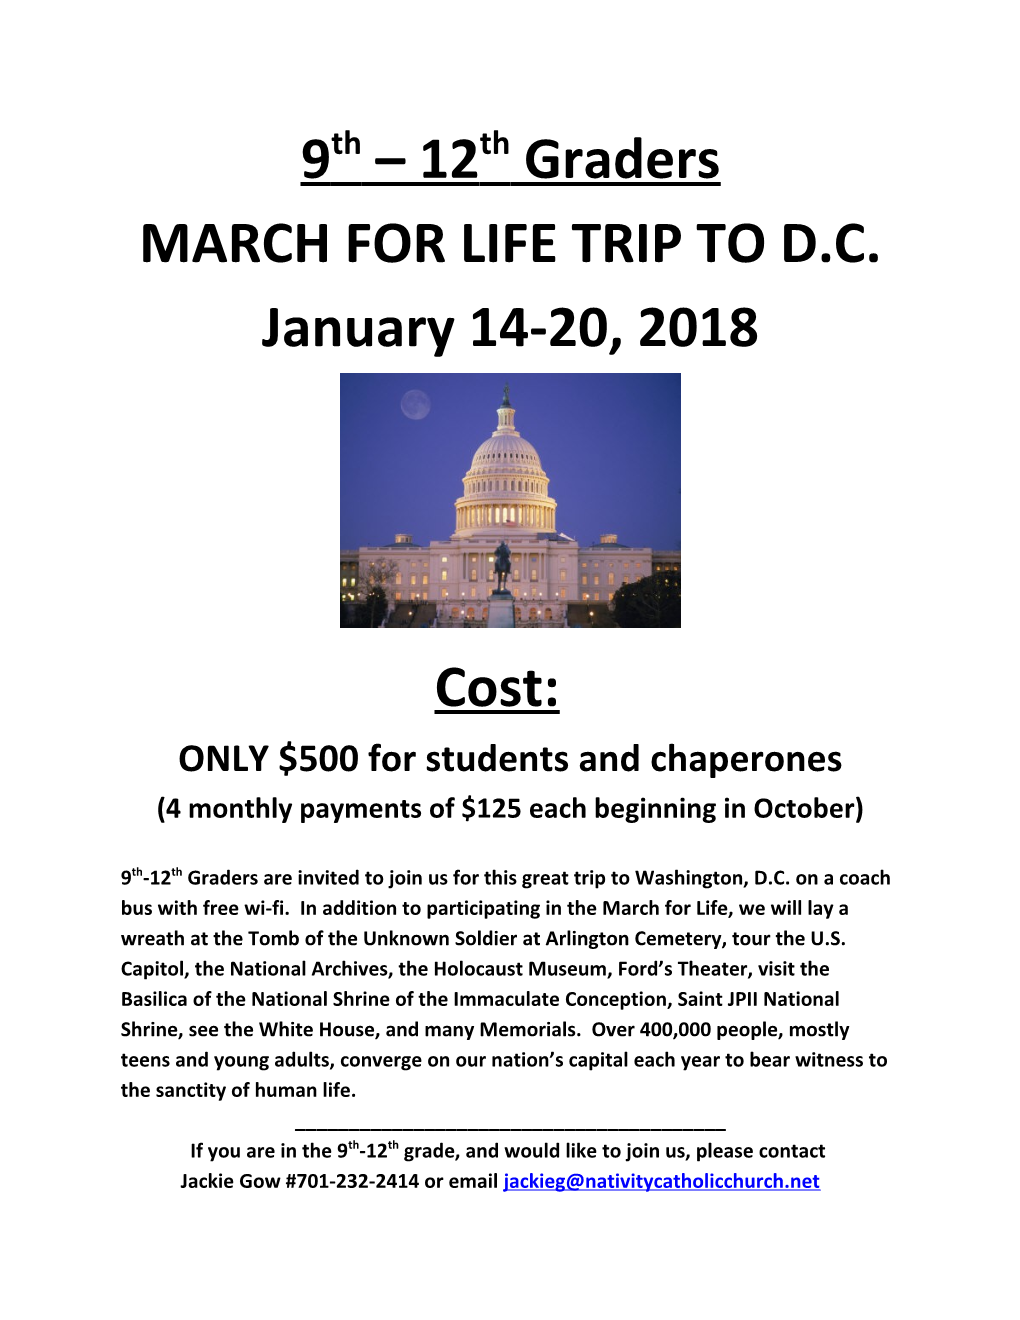 ONLY $500For Students and Chaperones